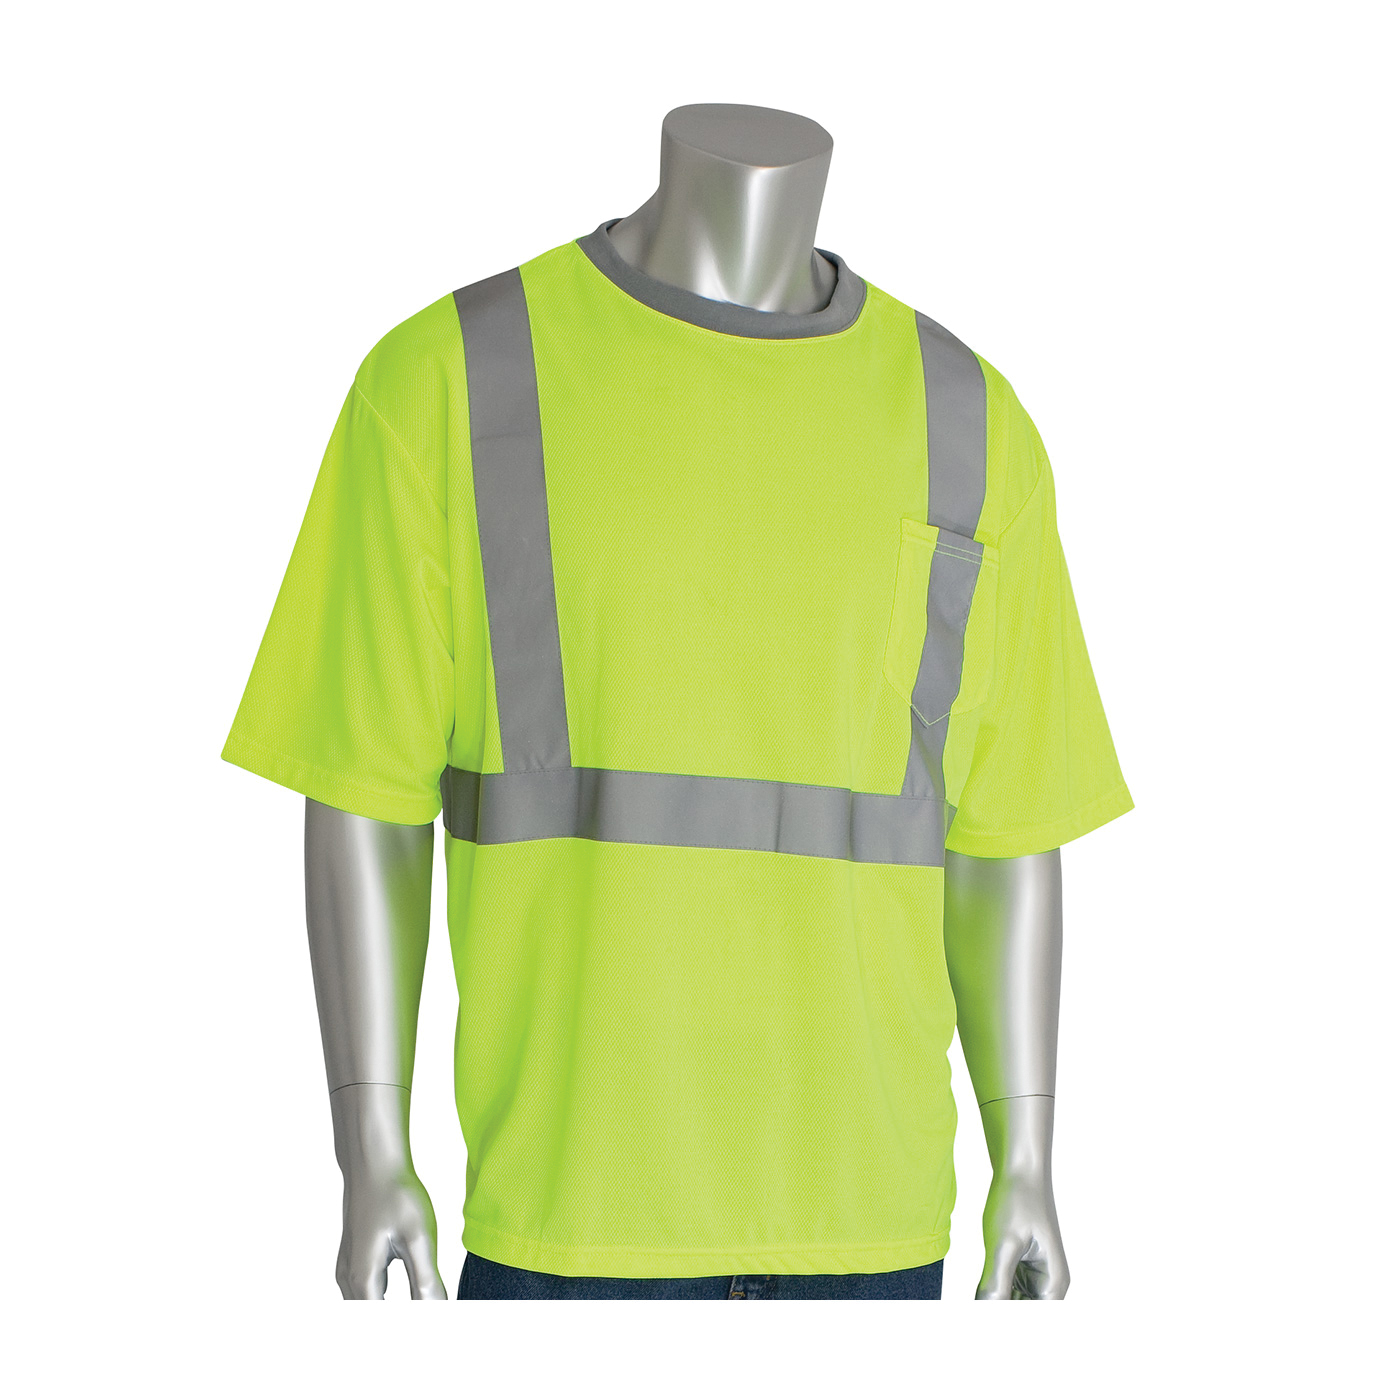 PIP® 312-1200-LY/3X Short Sleeve Crew Neck T-Shirt With Reflective, 3XL, Hi-Viz Lime Yellow, Bird's Eye Polyester, 33-1/2 in L